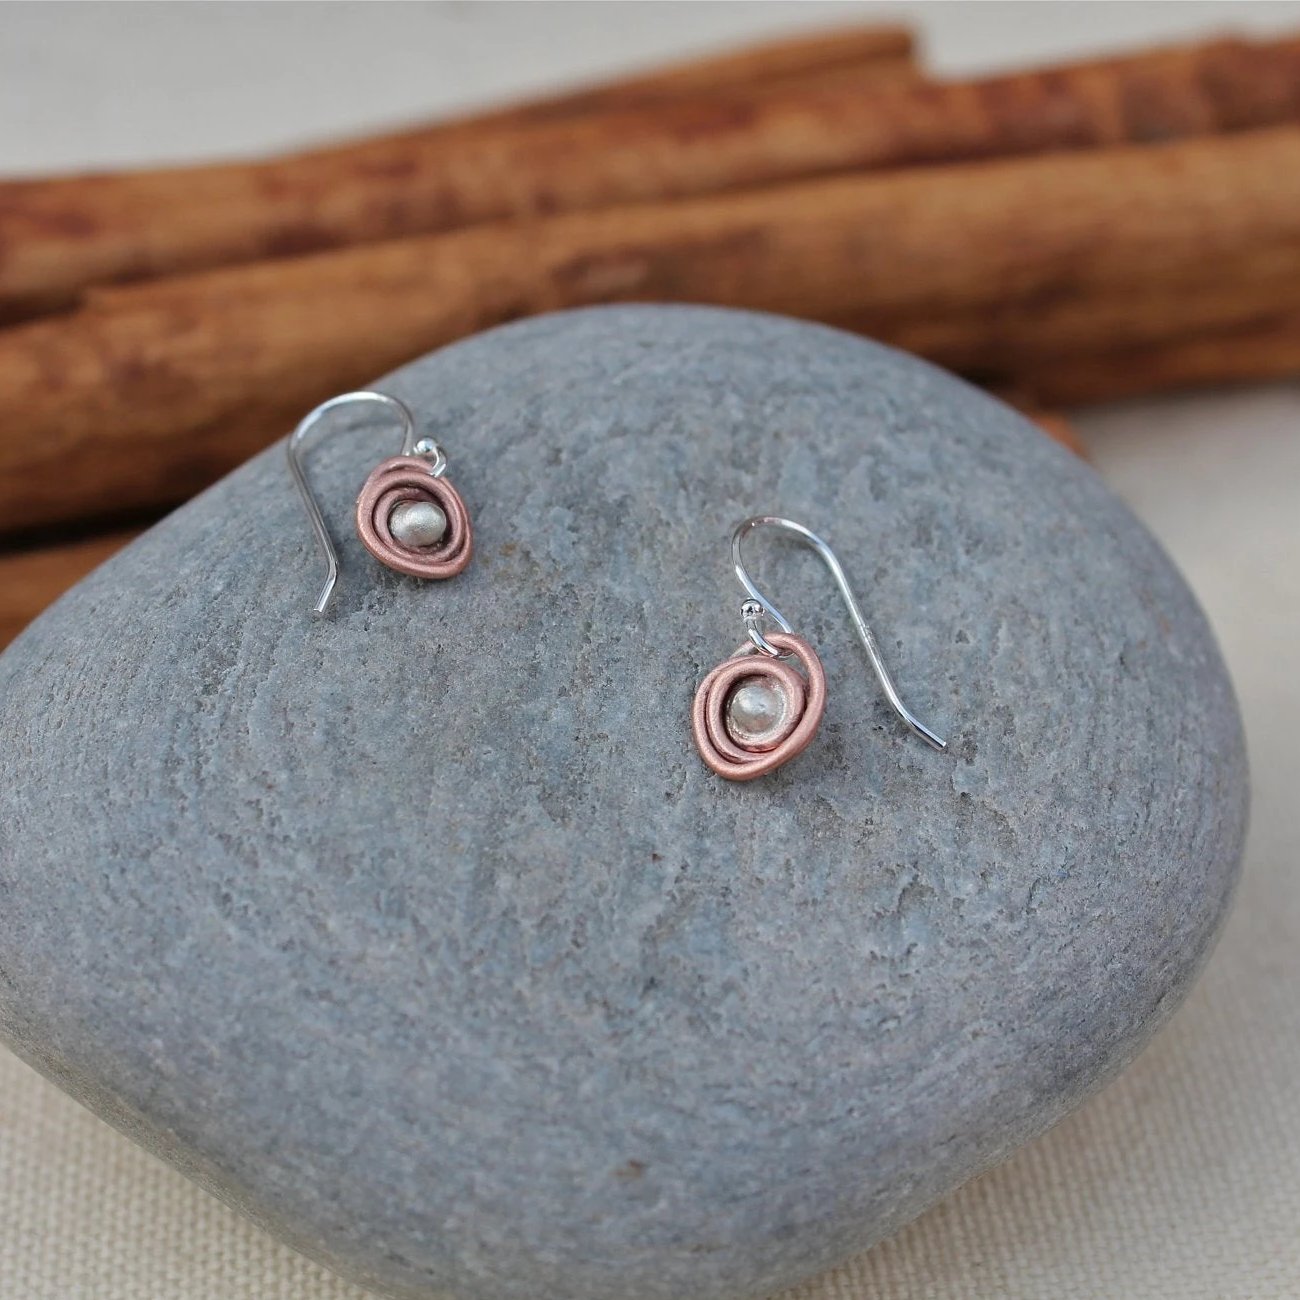 Copper and Silver Mini Nest Earrings